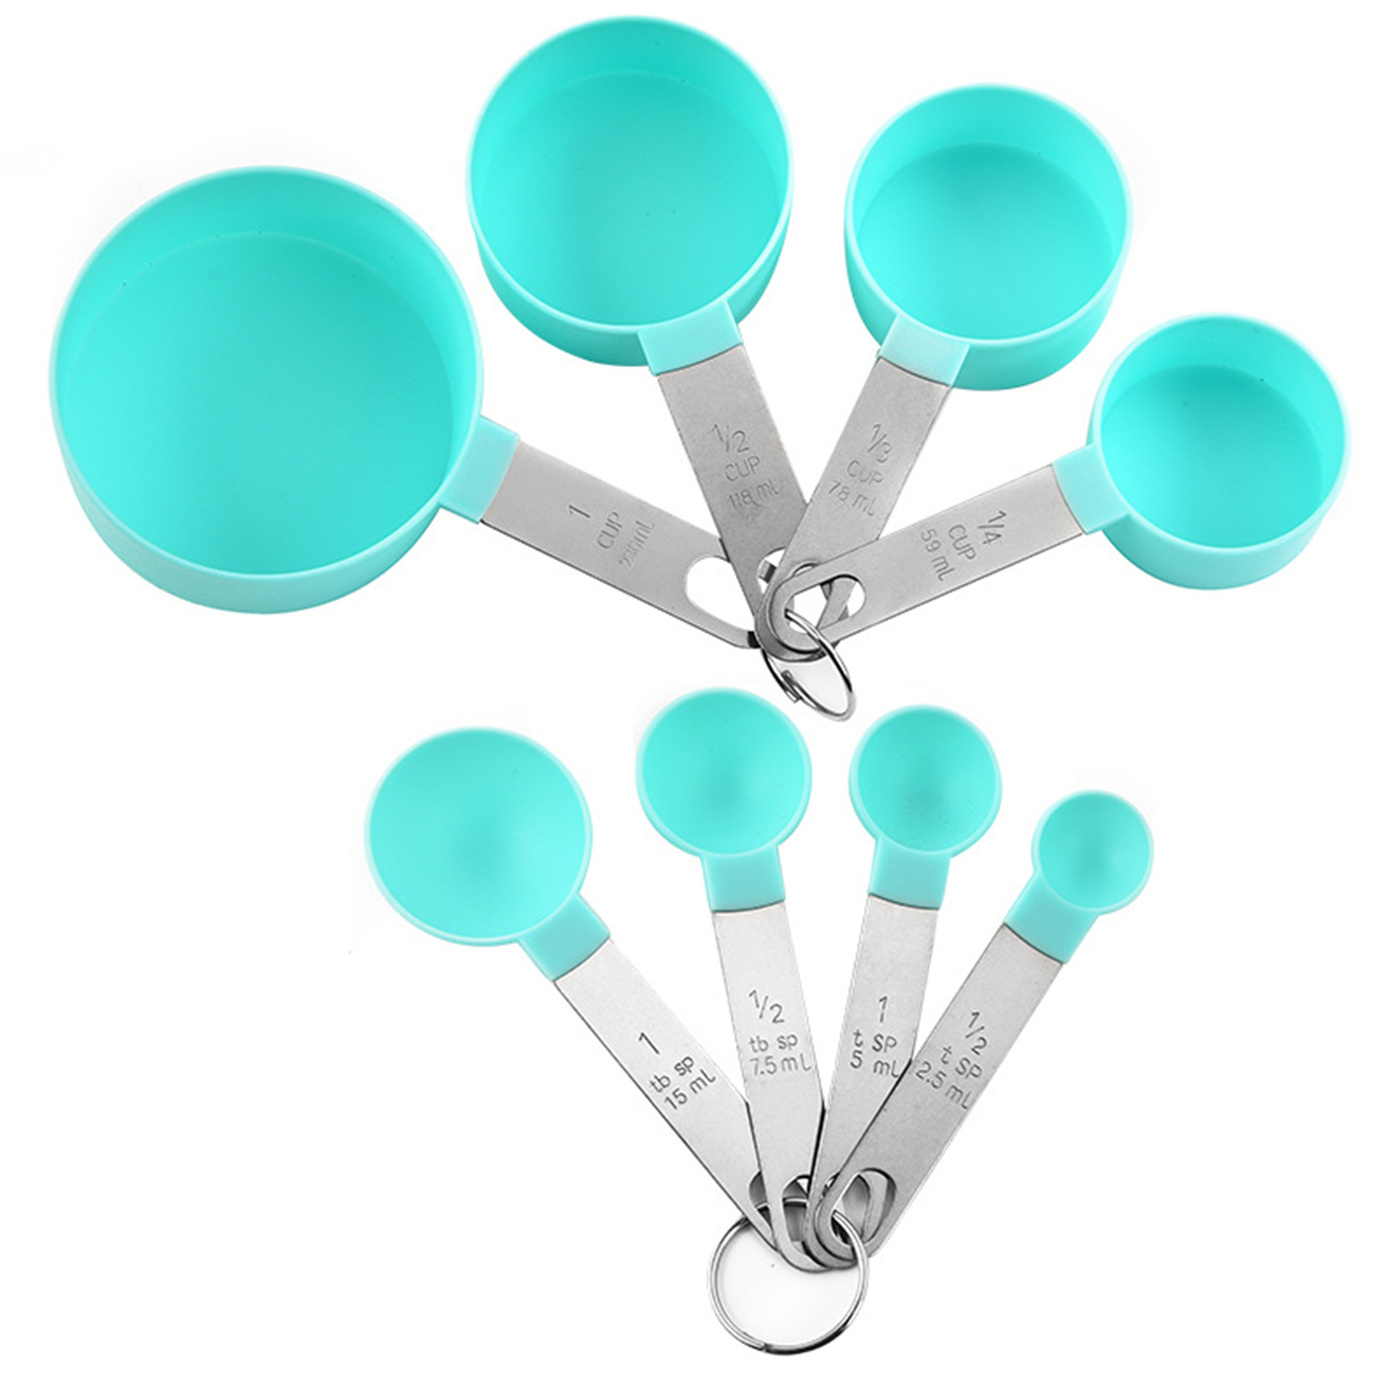 Measuring Spoon Set - Stainless Steel Measuring Spoons and Blue